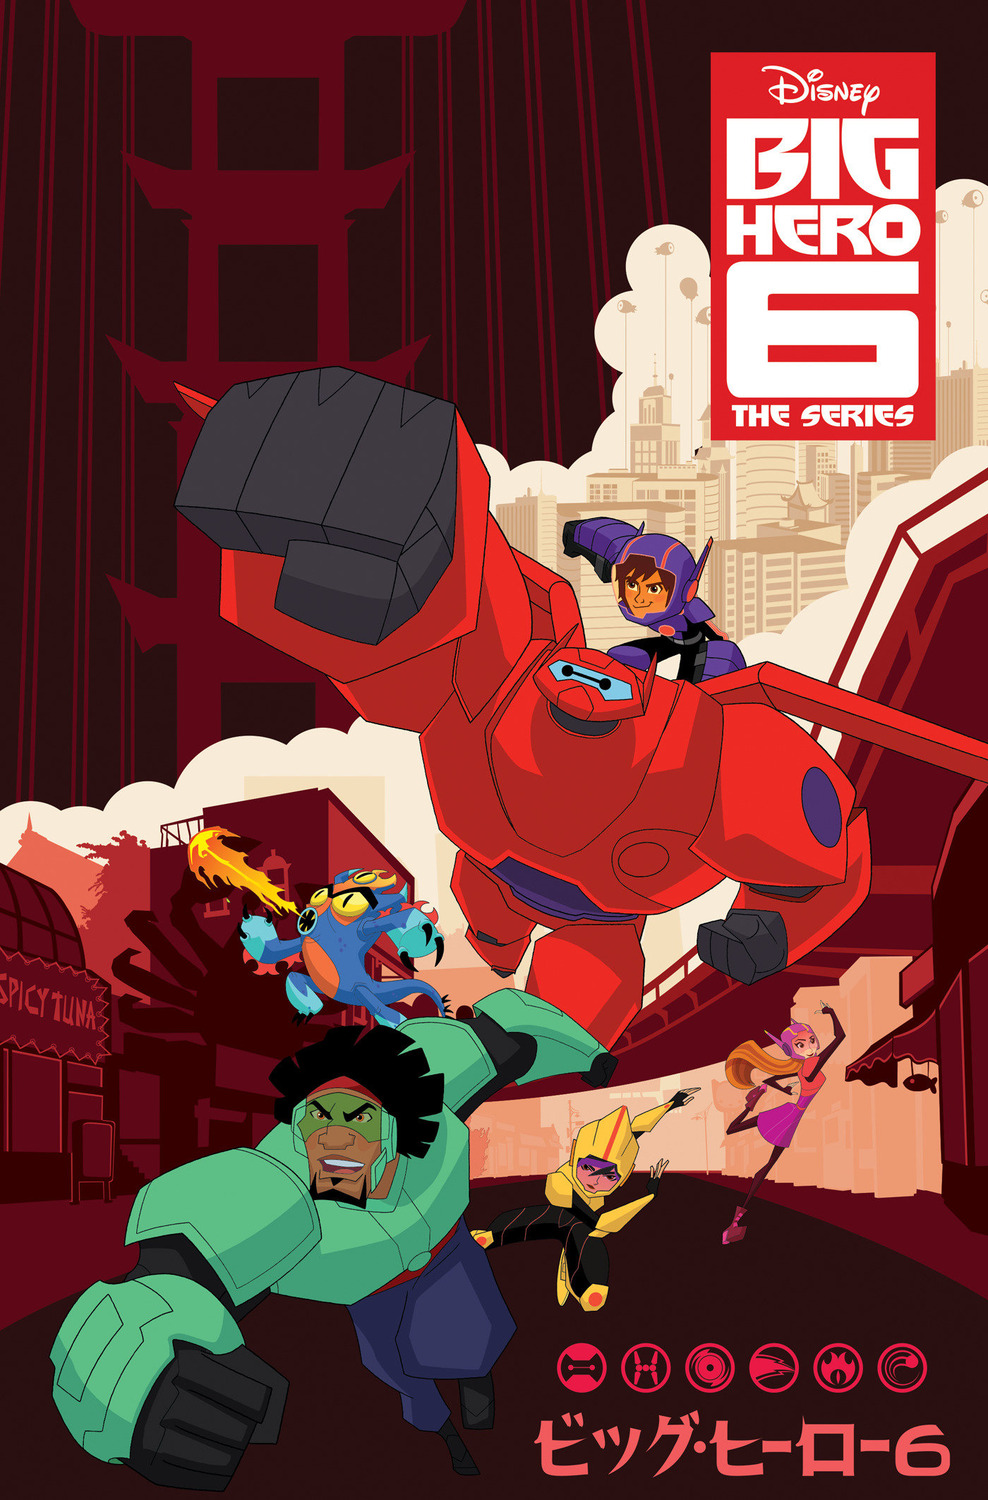 Extra Large TV Poster Image for Big Hero 6 The Series (#3 of 3)